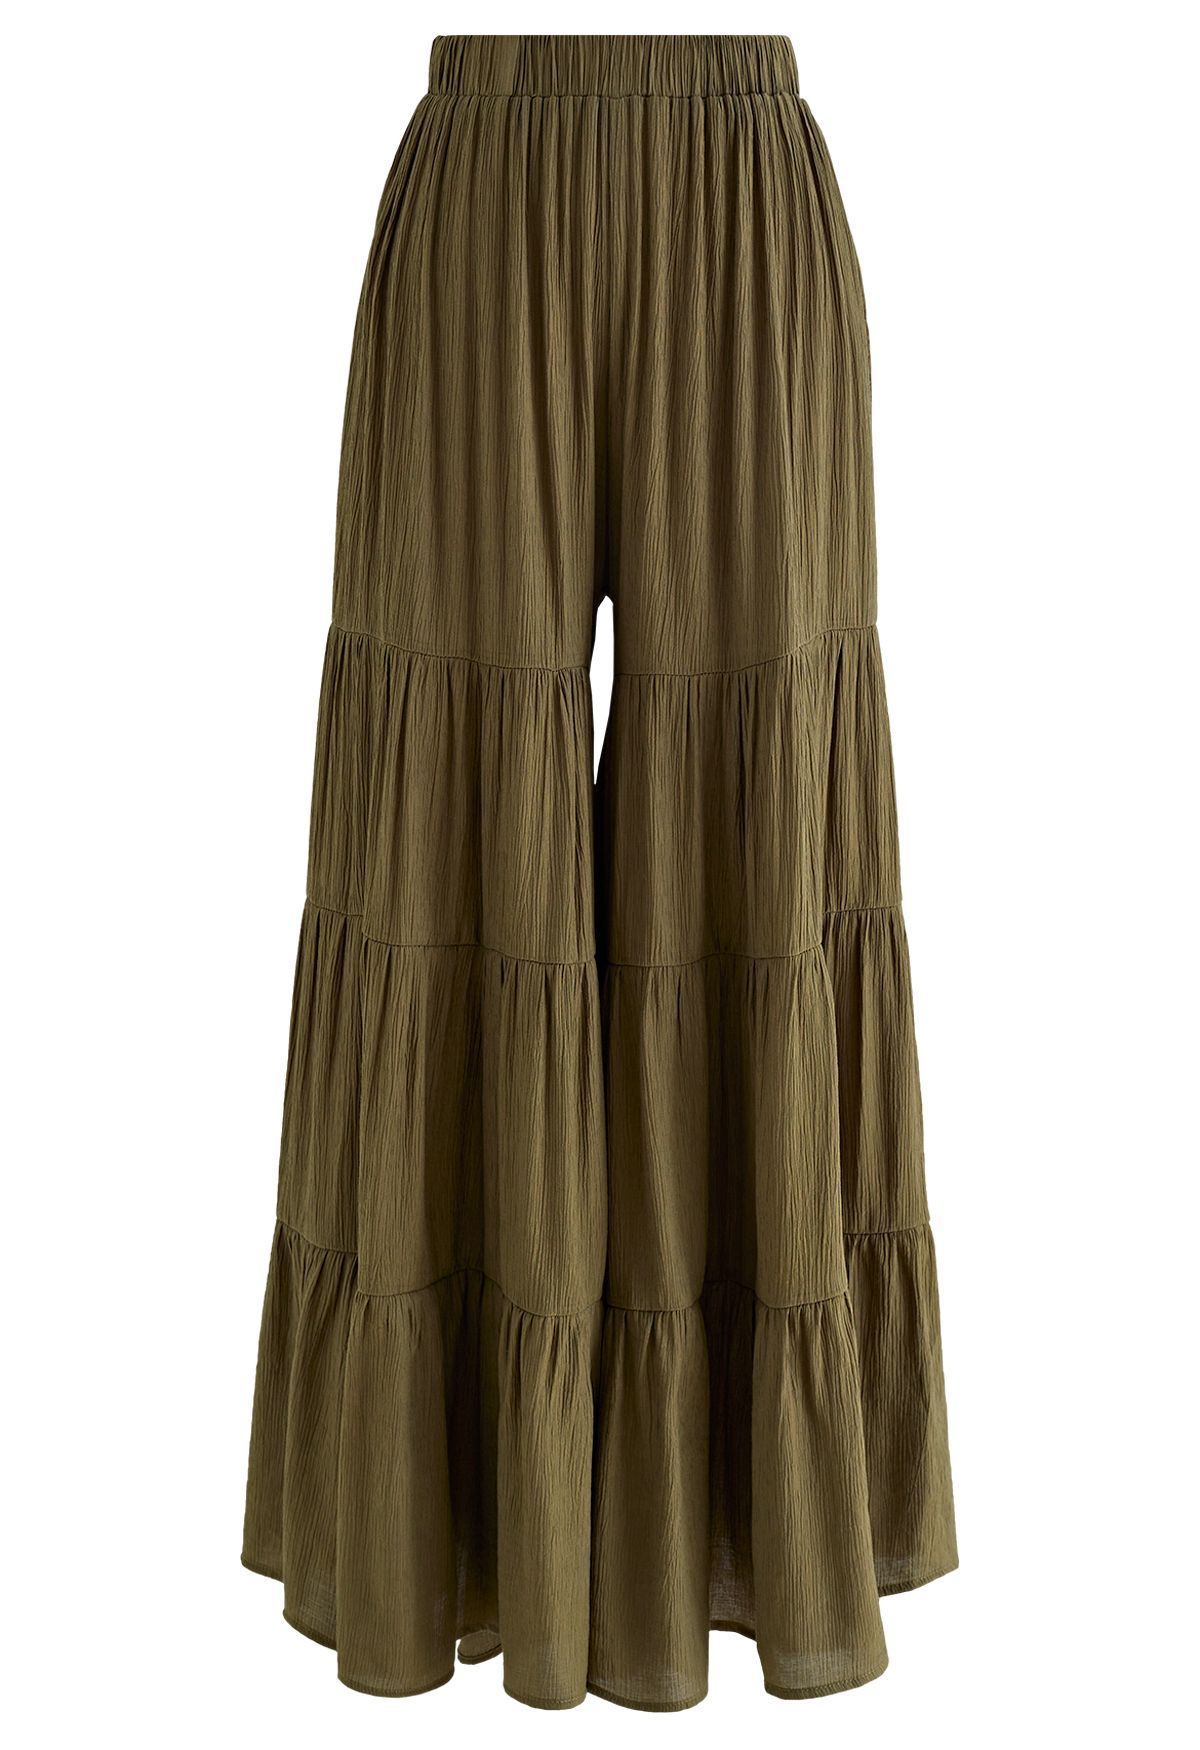 Sunny Days Wide-Leg Pants in Army Green | Chicwish